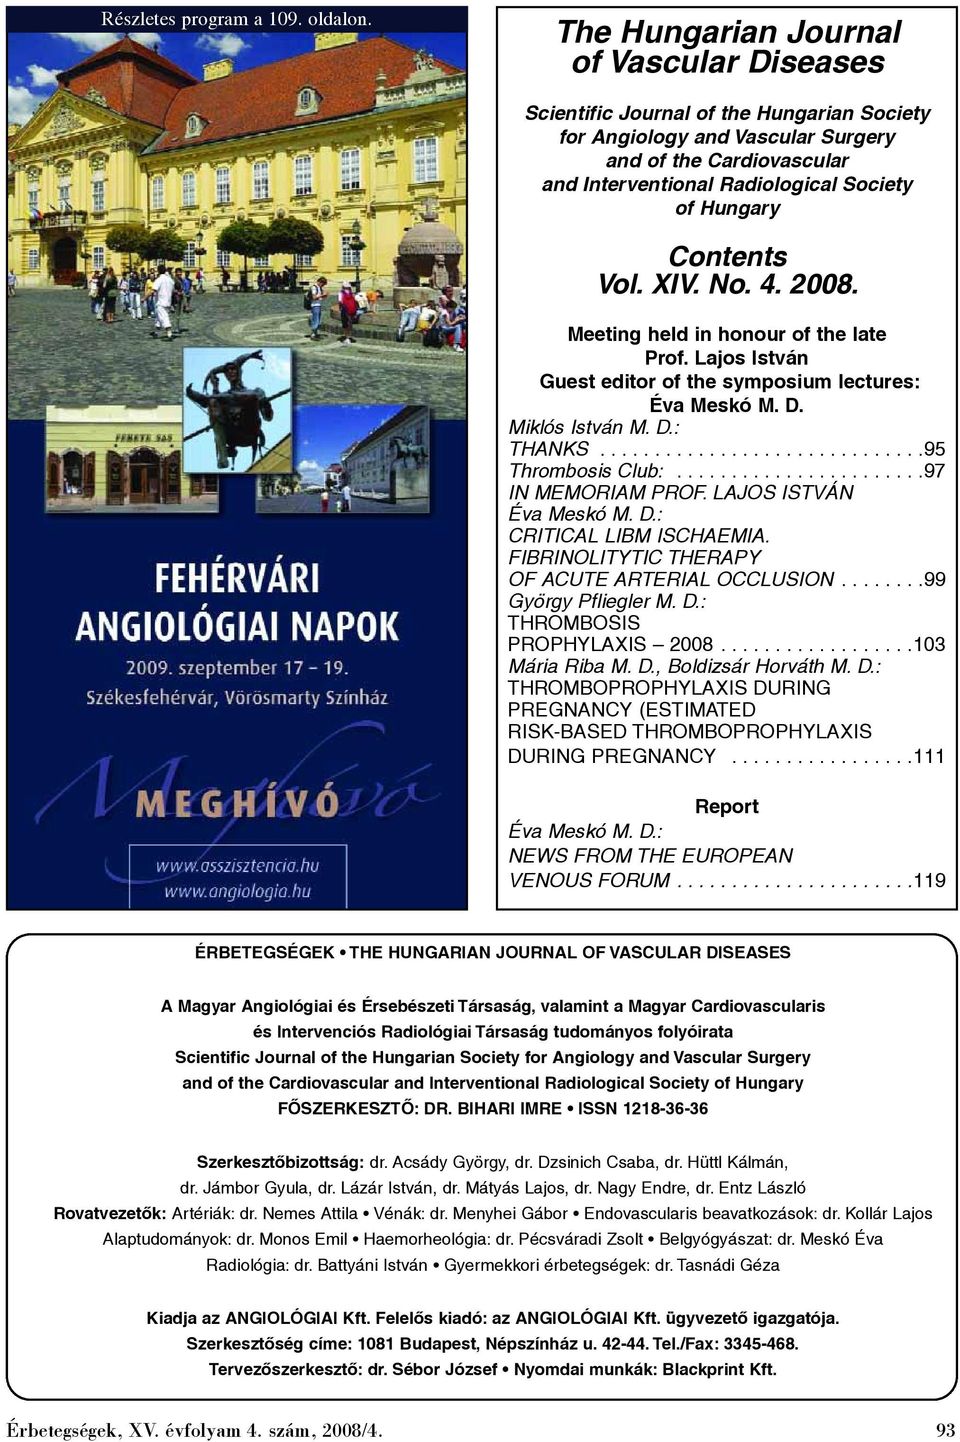 Contents Vol. XIV. No. 4. 2008. Meeting held in honour of the late Prof. Lajos István Guest editor of the symposium lectures: Éva Meskó M. D. Miklós István M. D.: THANKS..............................95 Thrombosis Club:.